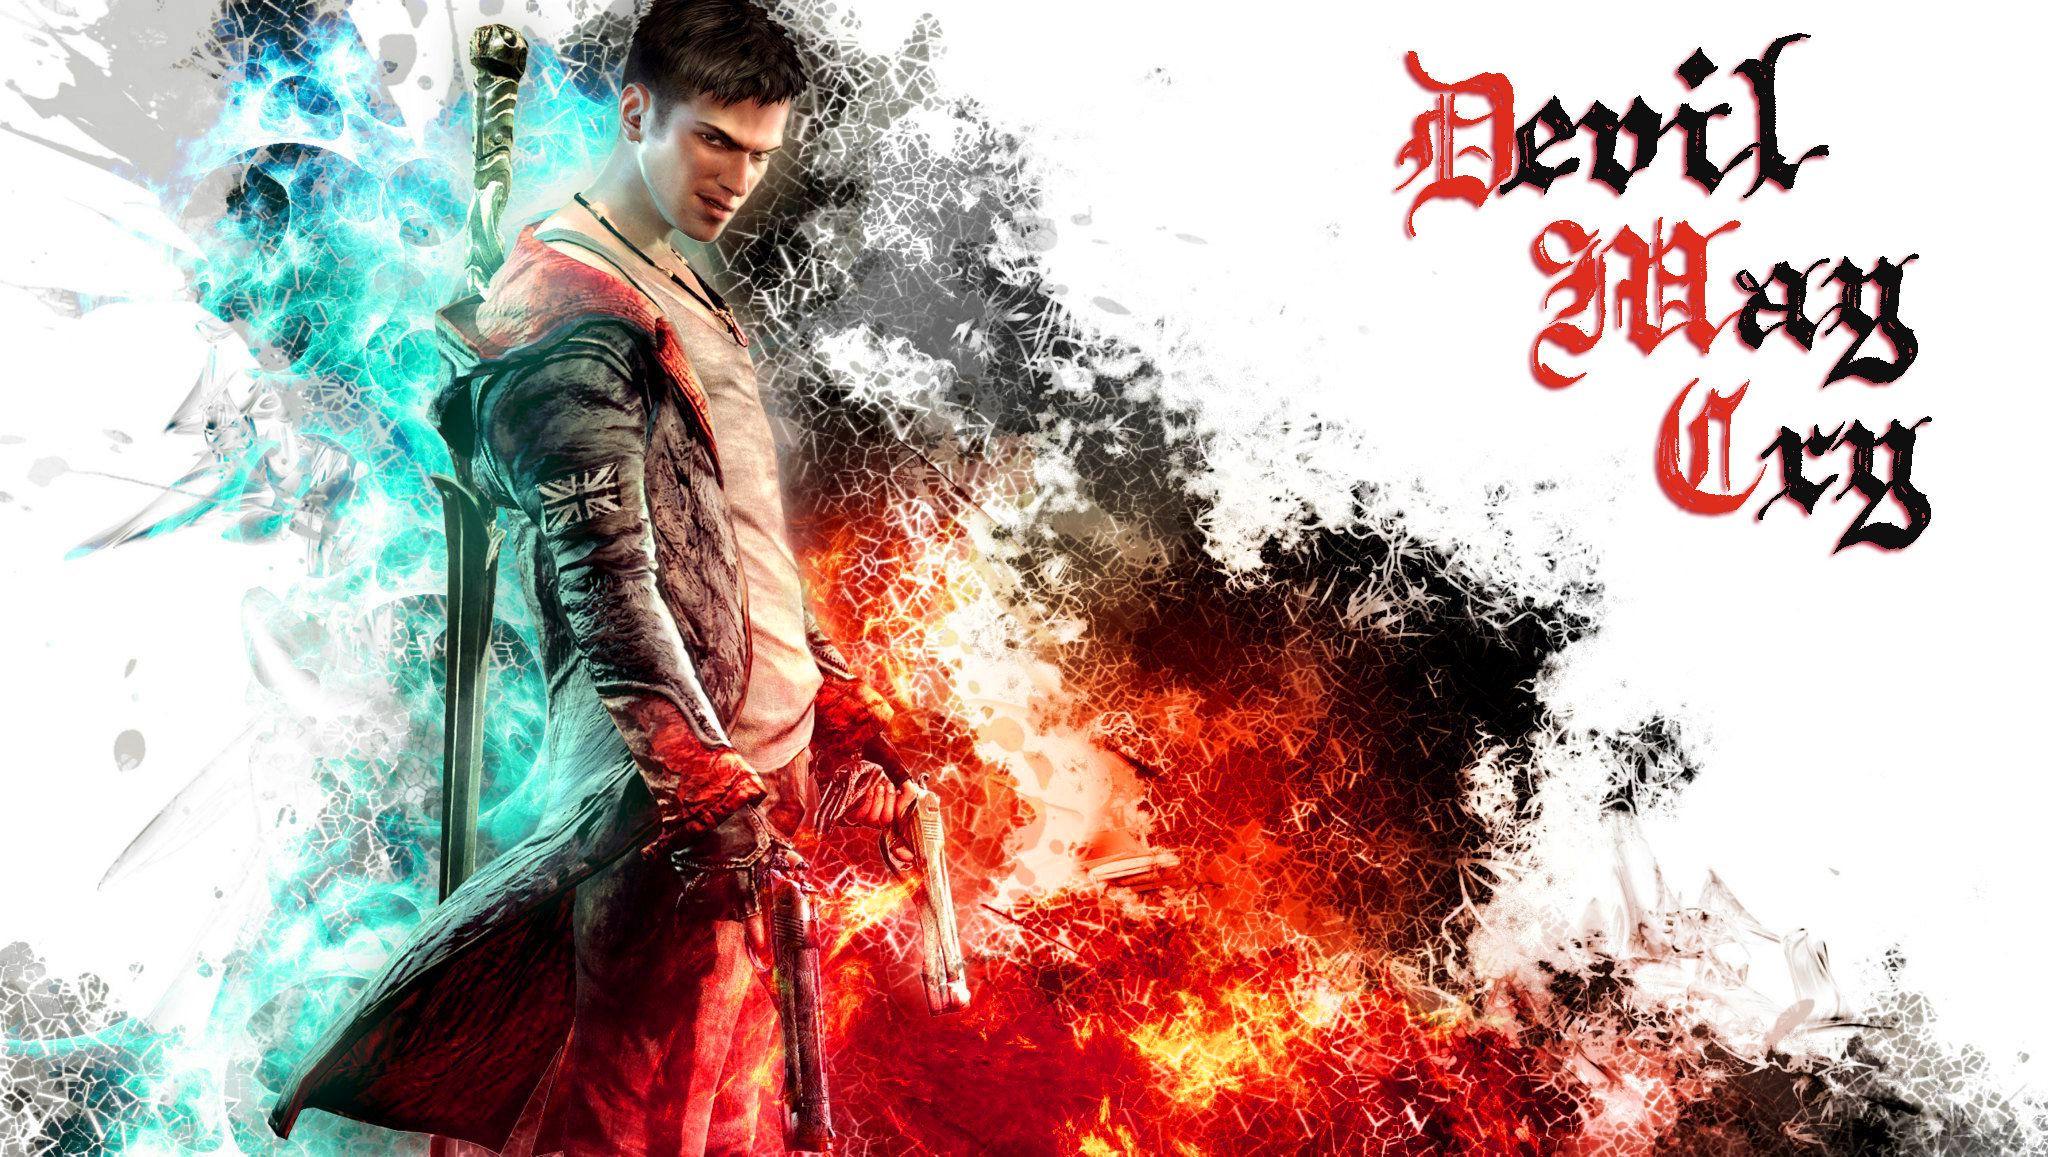 High Quality Dmc Devil May Cry Wallpaper. Full HD Picture